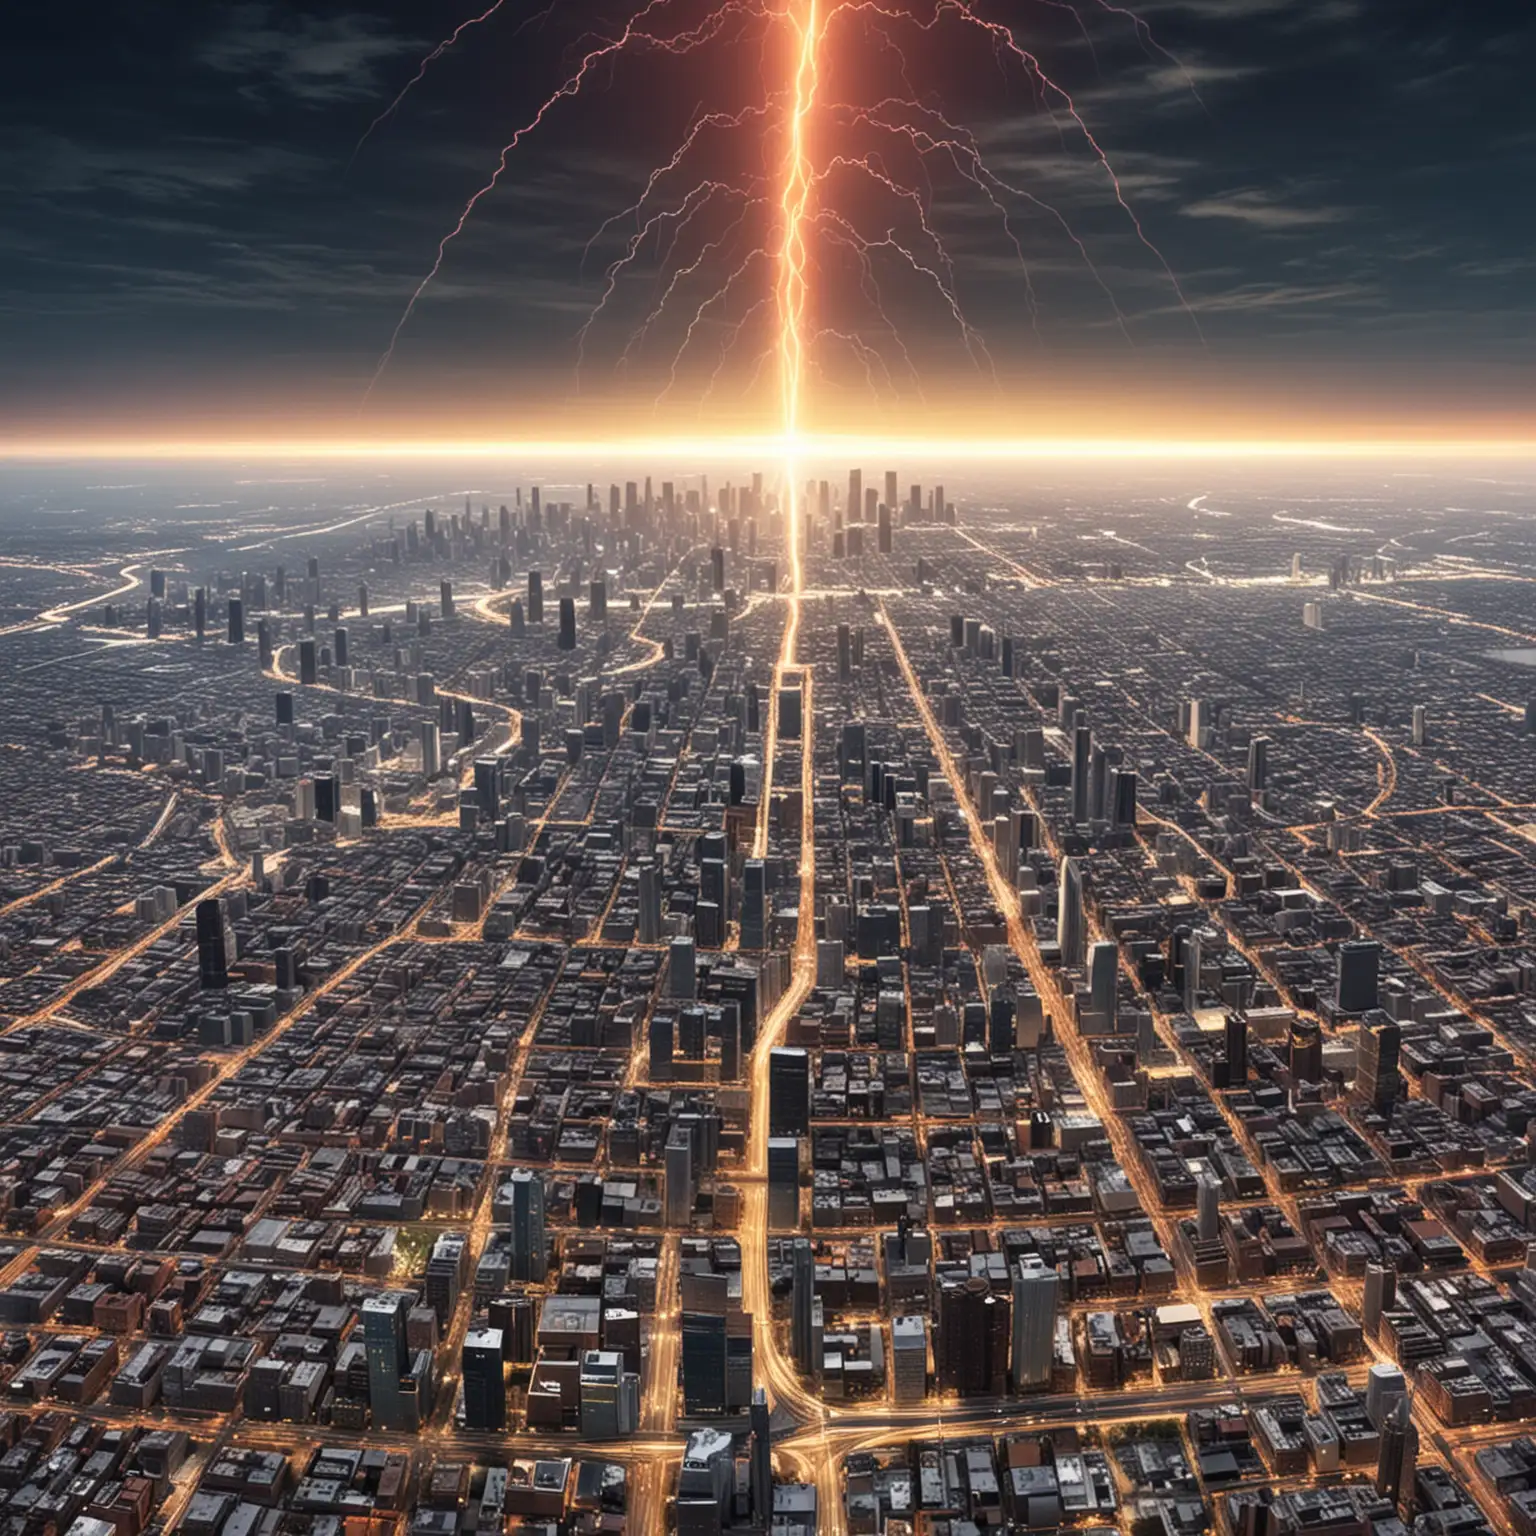 City Devastated by Electromagnetic Pulse Attack